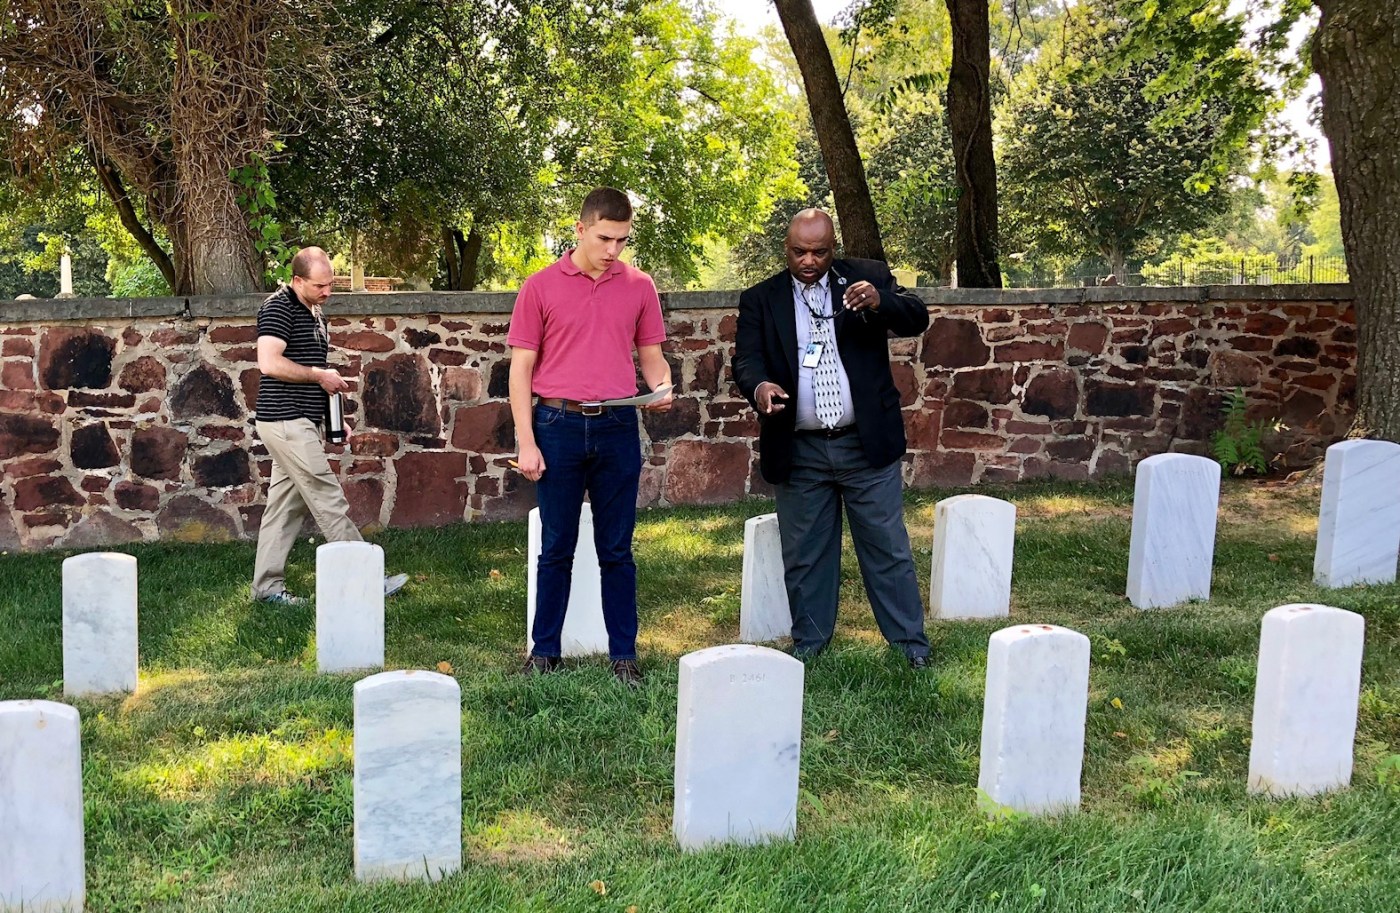 IMAGE: James Sanders, center, Quantico National Cemetery Director, speaks to students from Defense Information School (DINFOS), during a site visit to Alexandria National Cemetery (ANC) July 13, 2018. DINFOS provides its students an opportunity to work with local organizations and businesses within the Fort Meade, Maryland area, to produce the student’s capstone presentation.